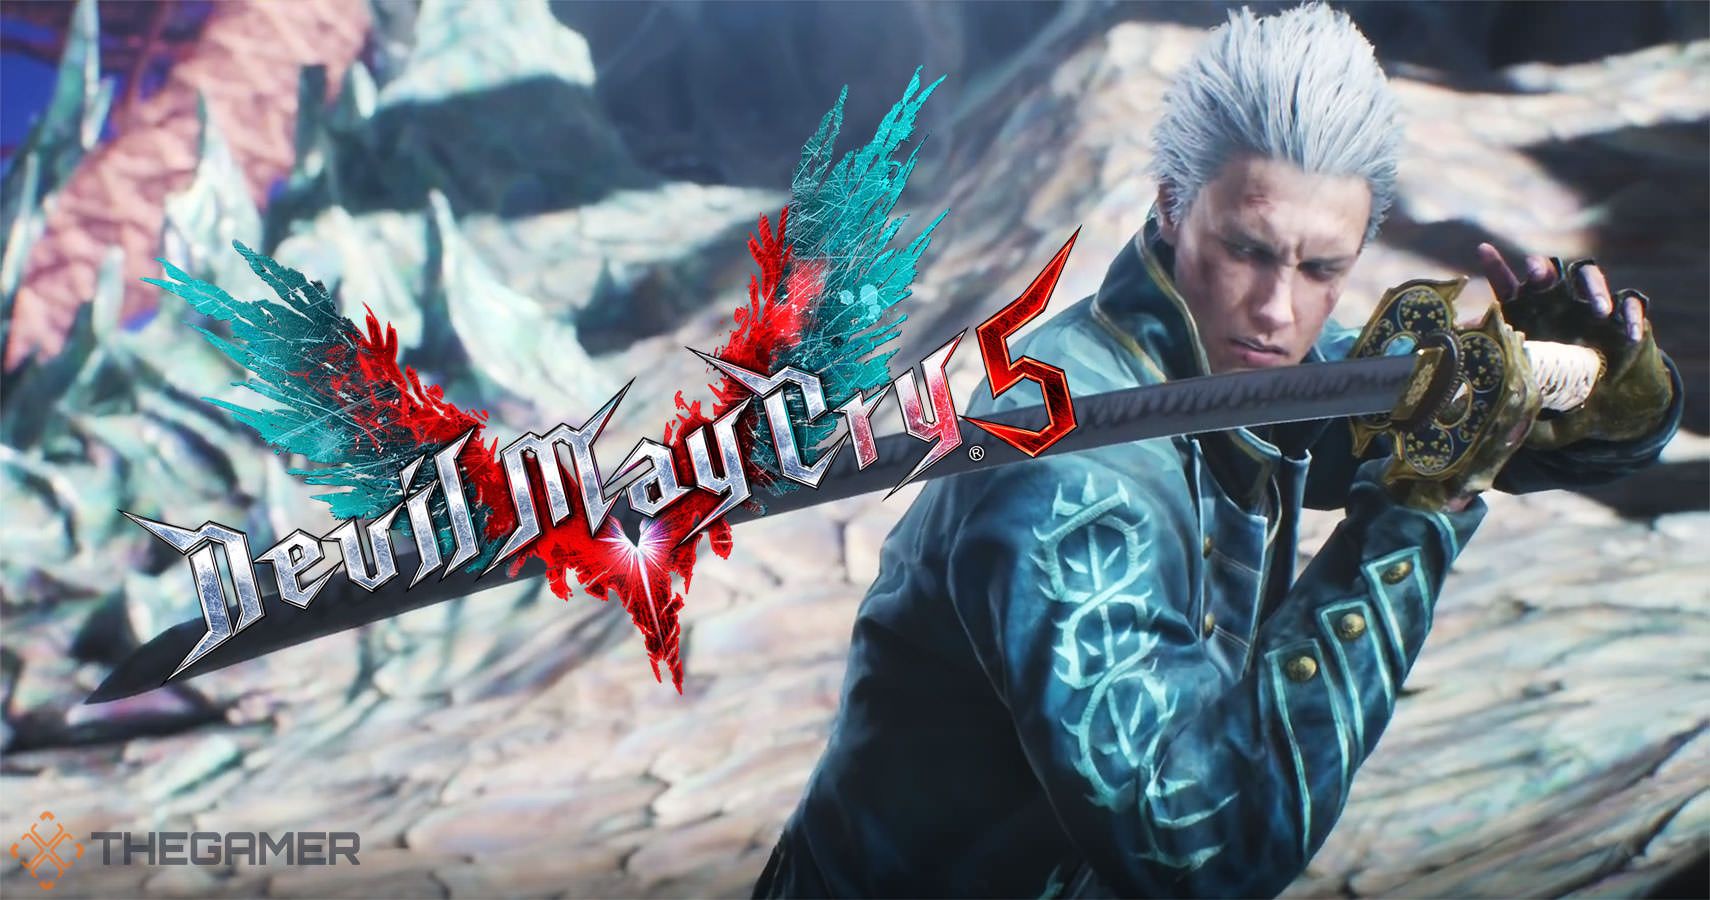 Since DMC 5's release Vergil has become an iconic character